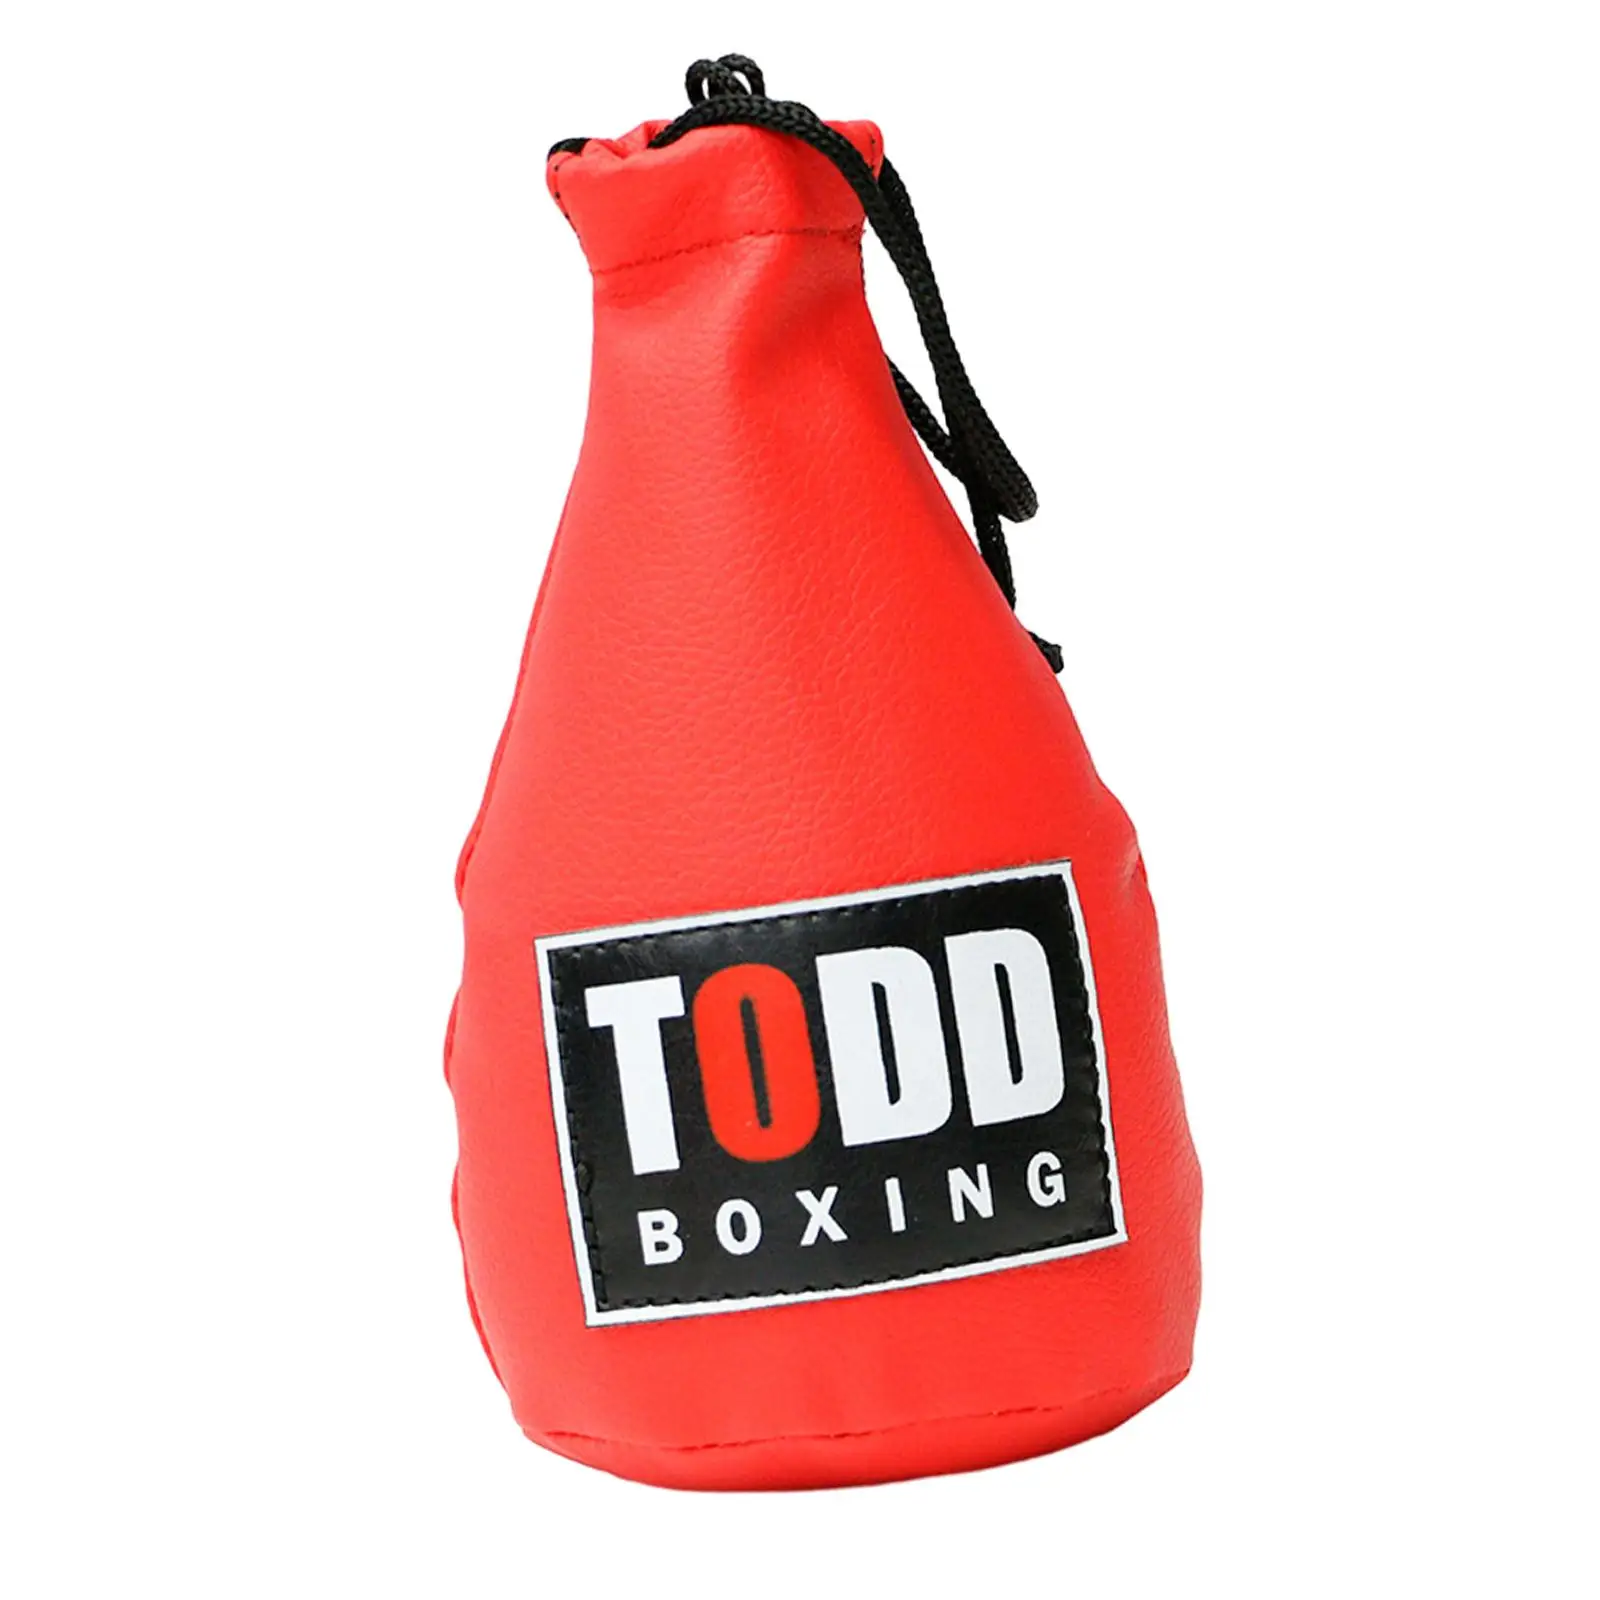 Dodge Reaction Bag Gear Mma Pendulum Training Adults Boxing Punch Bag for Punching Speed Skill Reaction Kickboxing Indoor